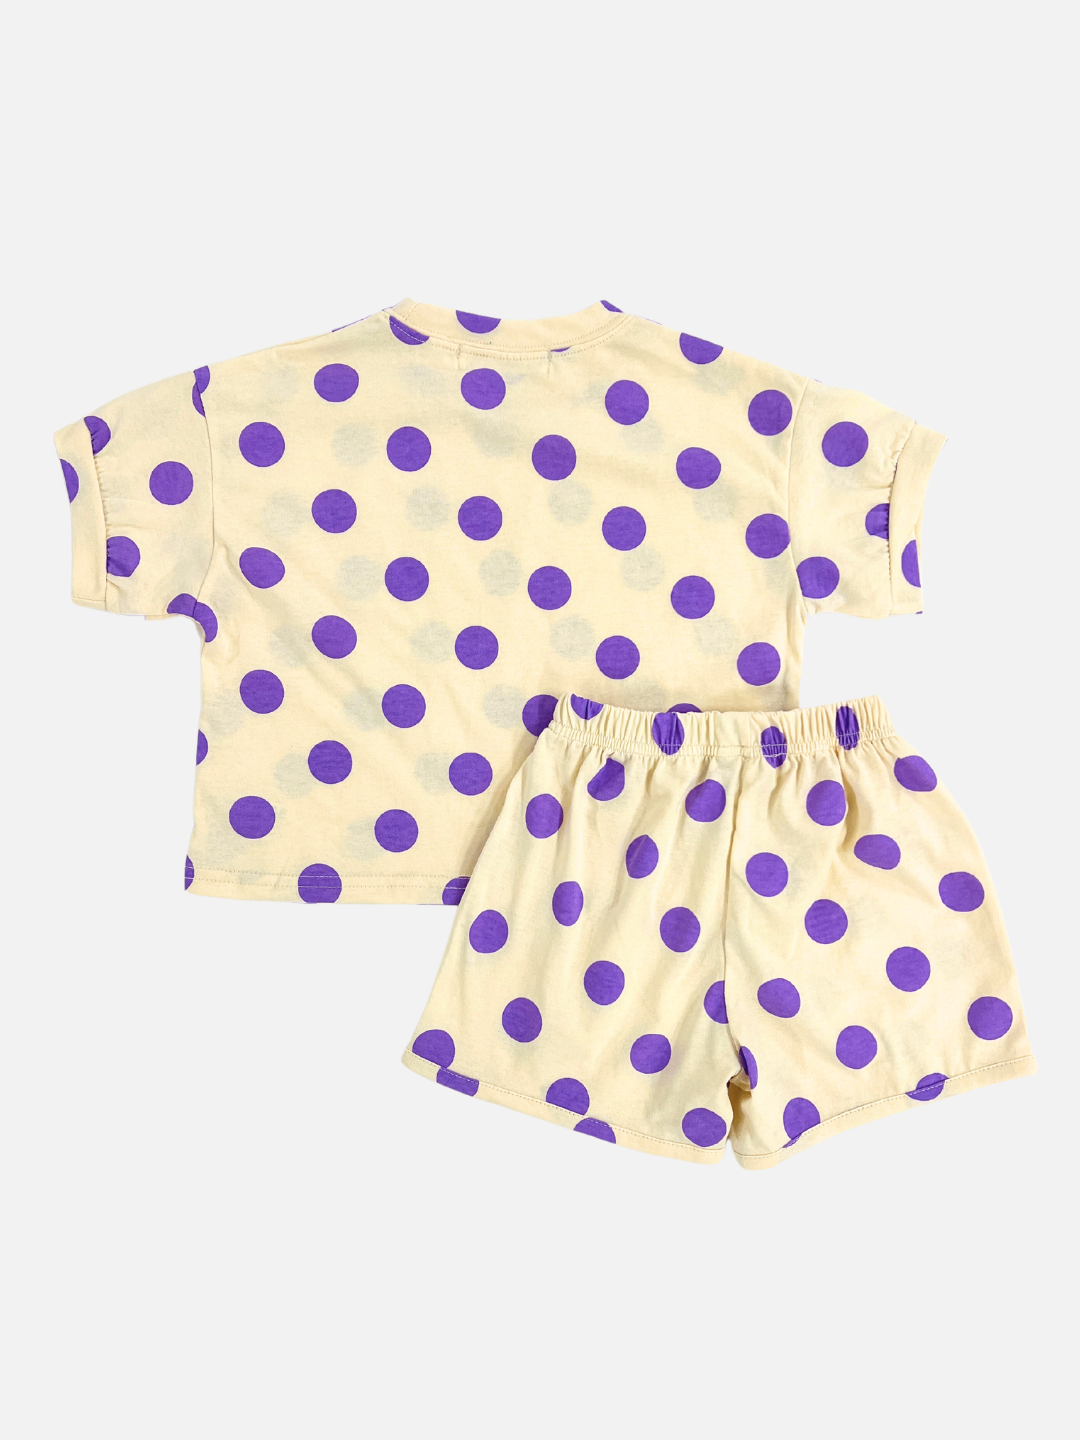 A kids' tee shirt and shorts set in a pettern of purple dots on an ecru background, back view